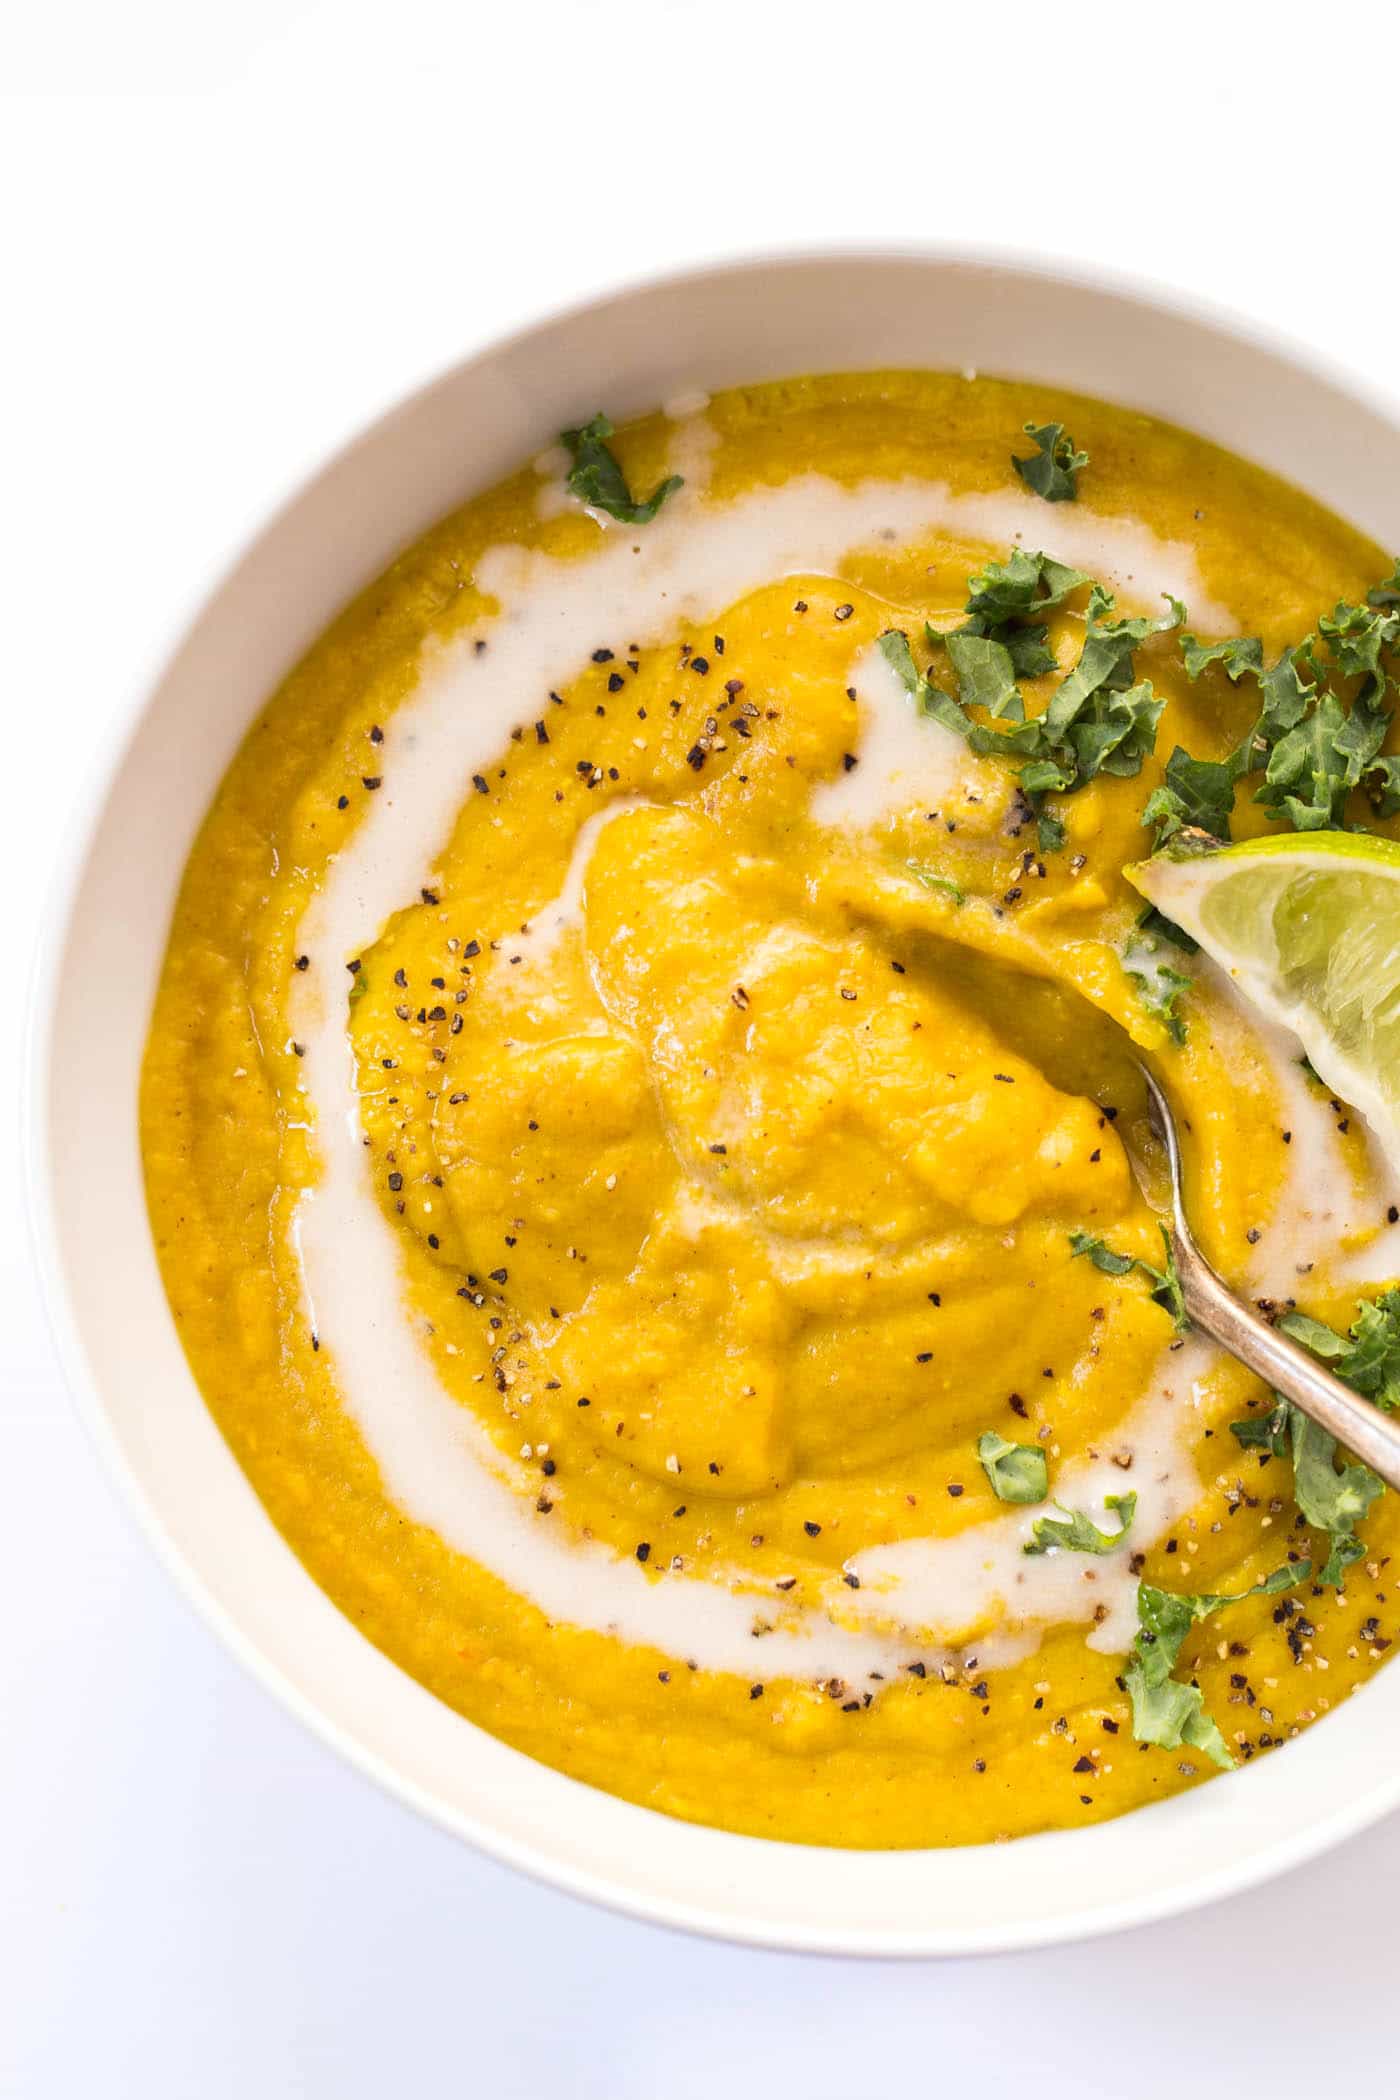 This healing Turmeric Cauliflower Soup is easy to make, packed with nutrients and SO flavorful!